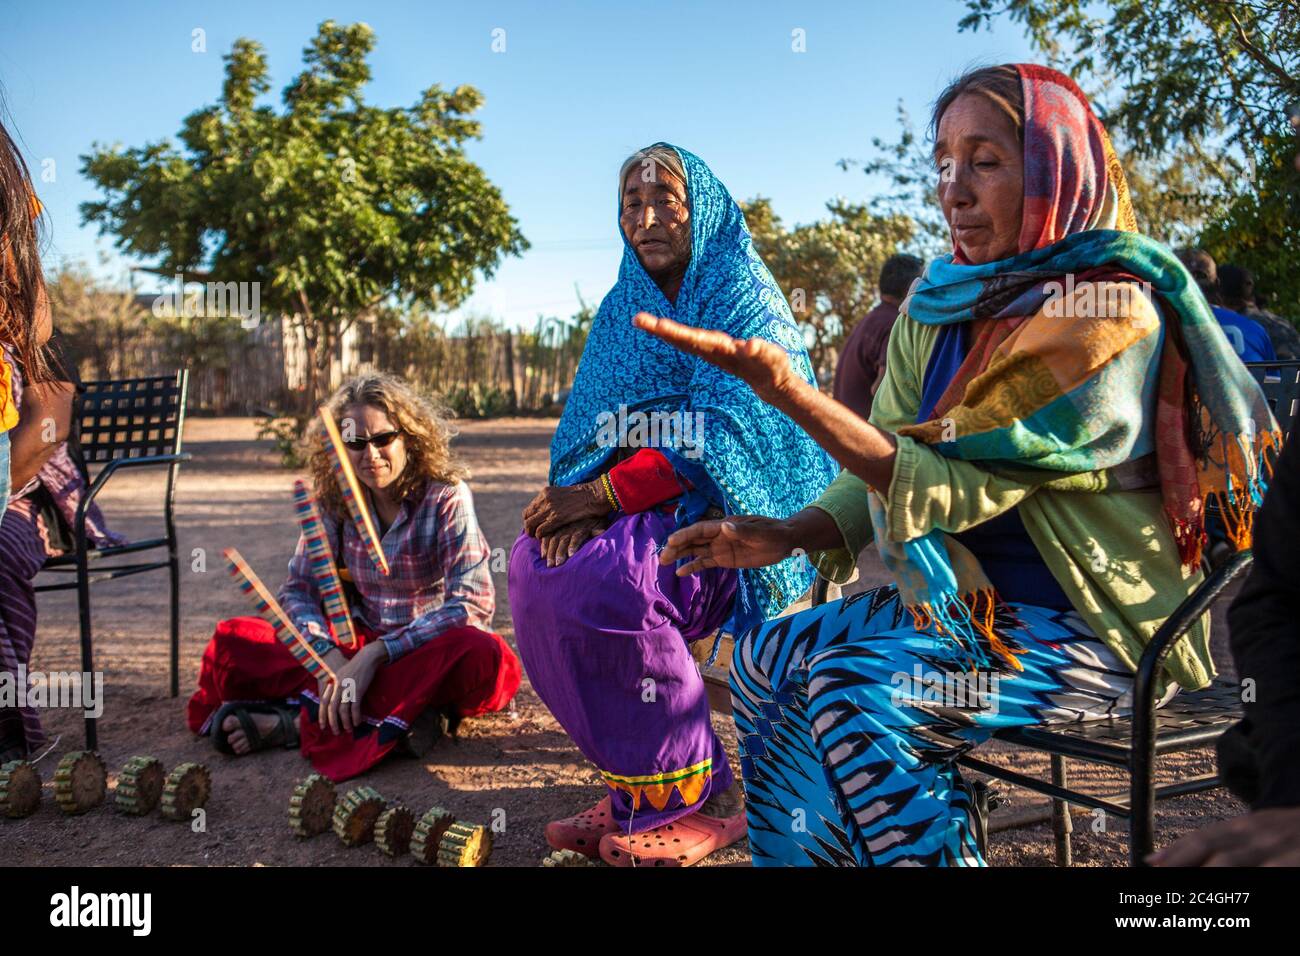 Punta Chueca, Mexico. 10th Dec, 2019. A group of women of the ComcÃac indigenous community play a traditional game.The ComcÃac or Seri tribe, as they are known by many, are located in Punta Chueca, Sonora desert, by the northern pacific coast of Mexico. The ComcÃac indigenous community has a strong female presence within their culture. They are the principal organisers, promoters and those who are celebrated during the rituals and traditions of the community. This could not be clearer, than during one of the most important rituals of the community, the ceremony of puberty. This celebration Stock Photo